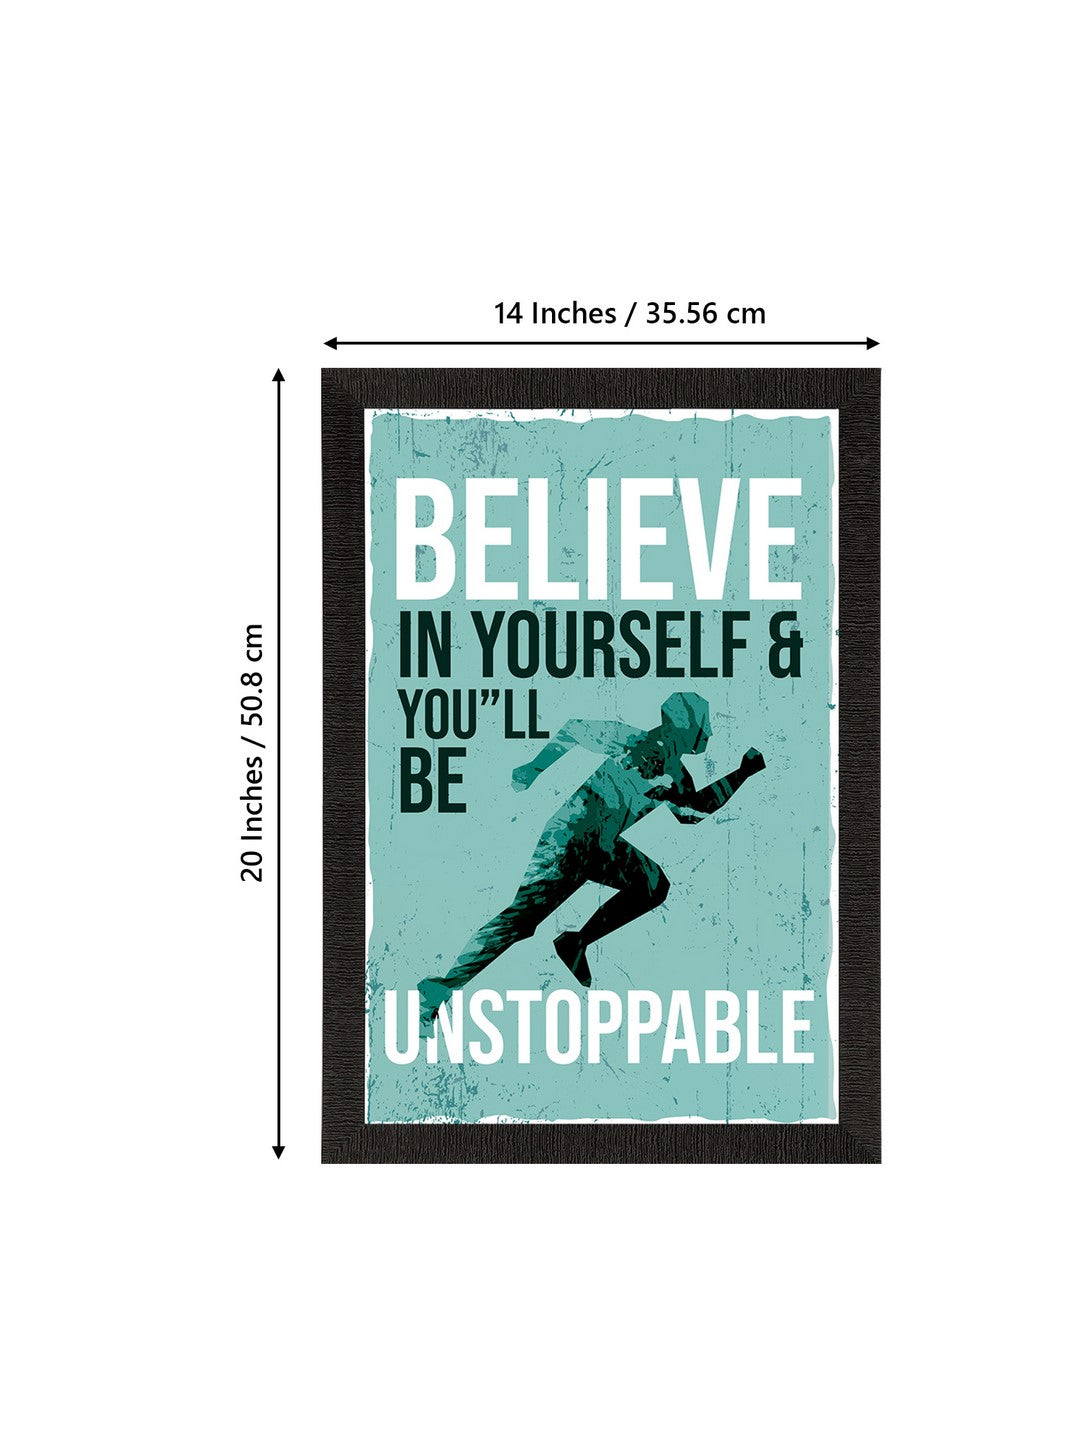 "BELIEVE In Yourself & You'll Be UNSTOPPABLE" Motivational Quote Satin Matt Texture UV Art Painting 3